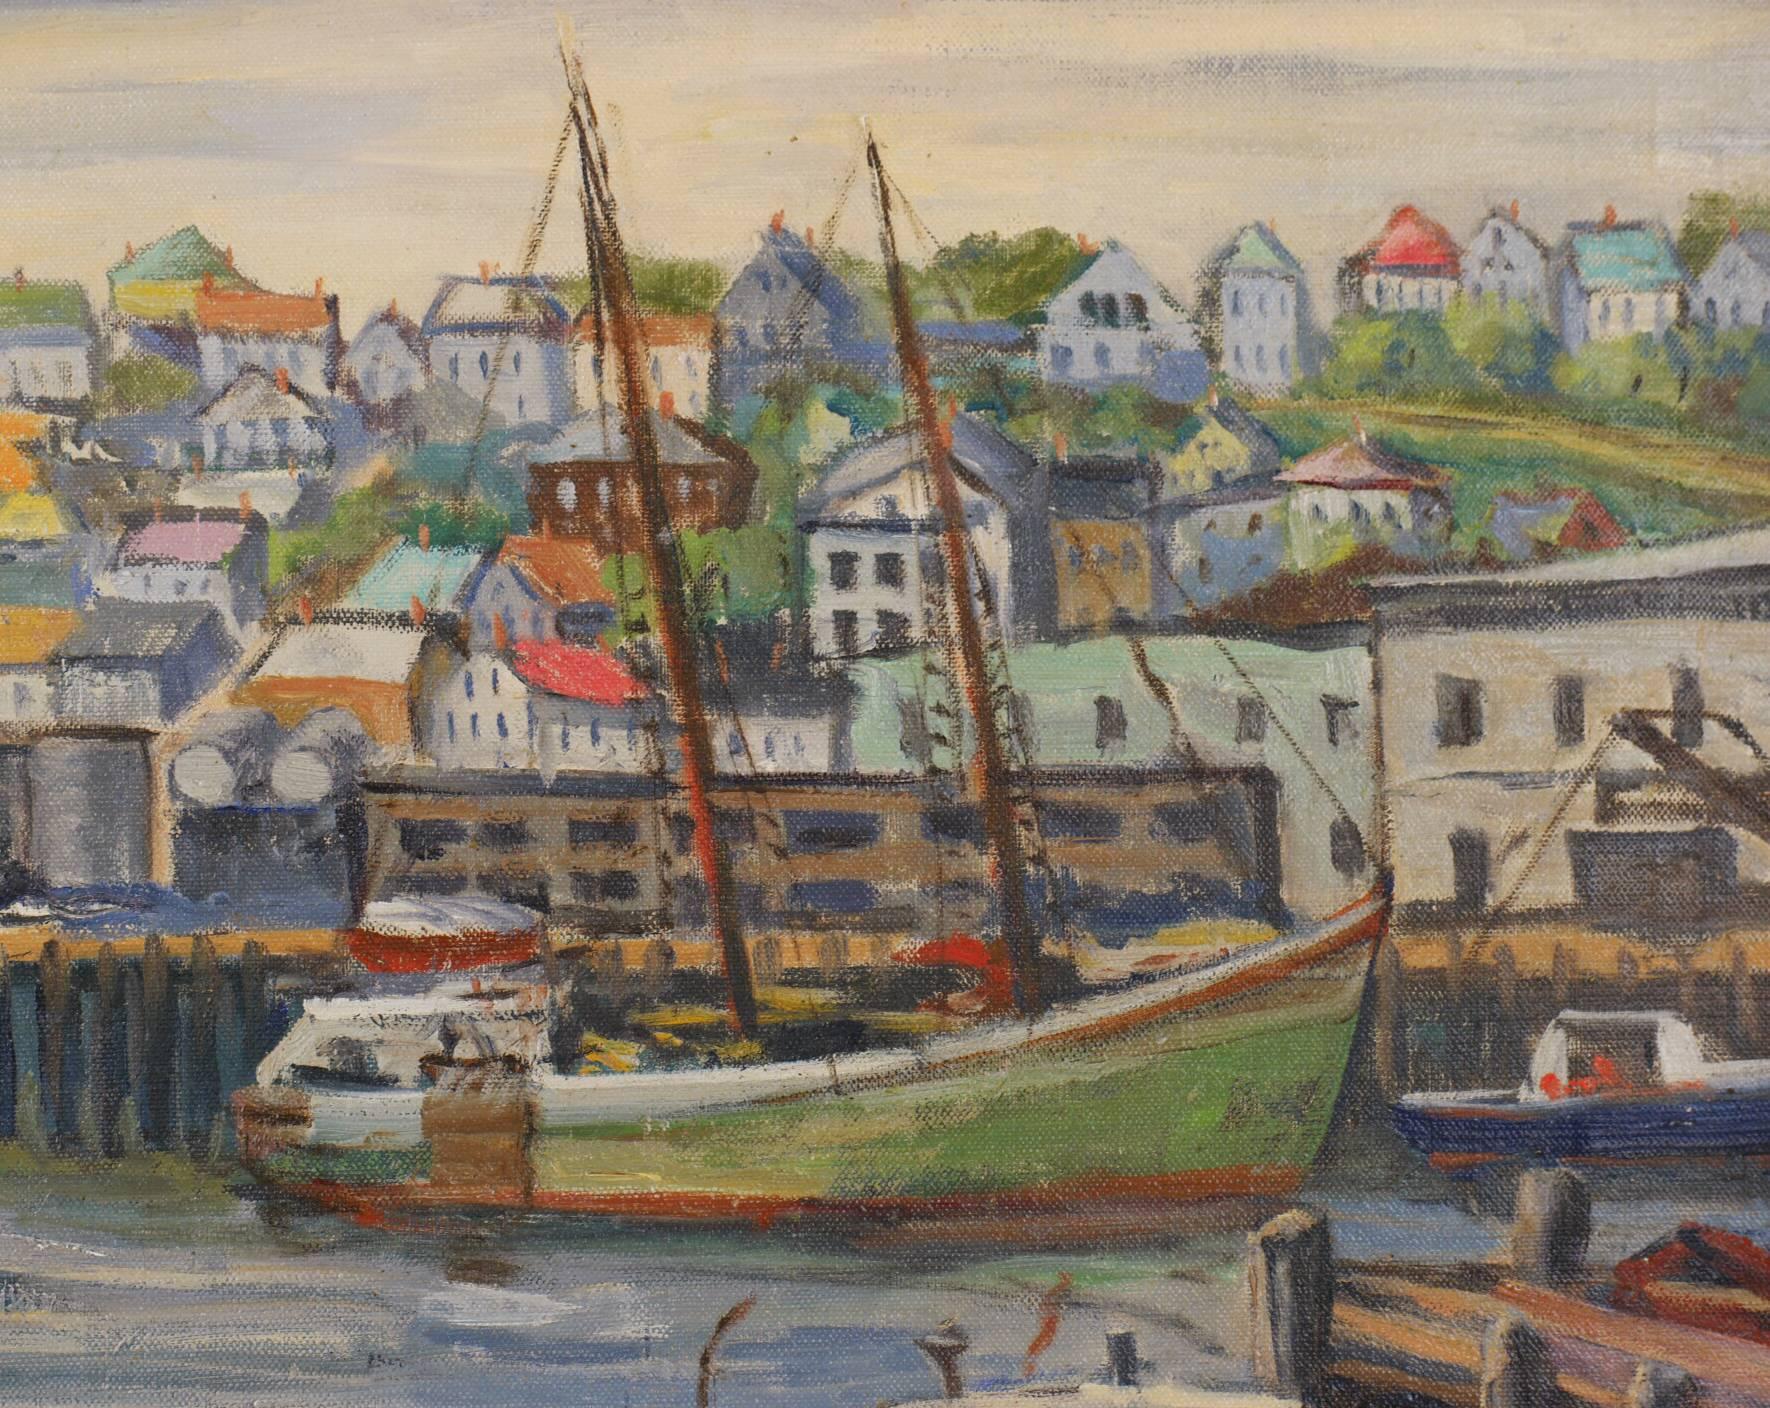 Gloucester Harbor MA - Impressionist Painting by Harry Shokler